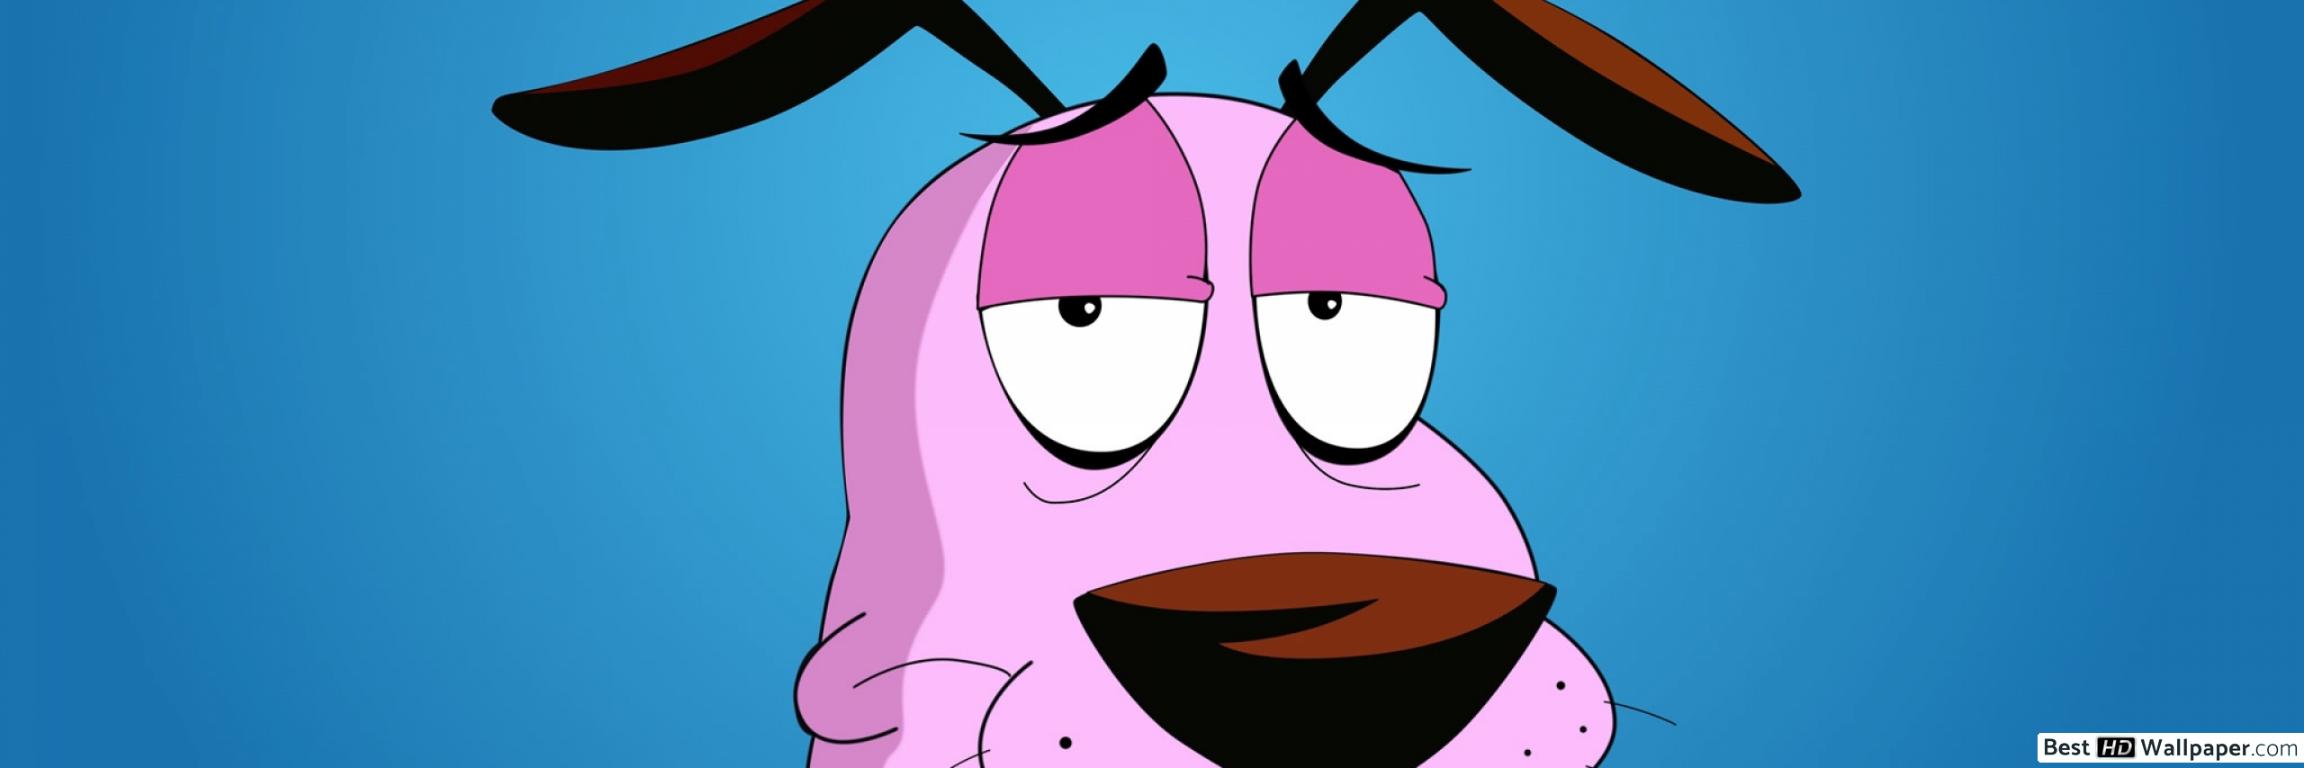 Courage The Cowardly Dog Upset - HD Wallpaper 